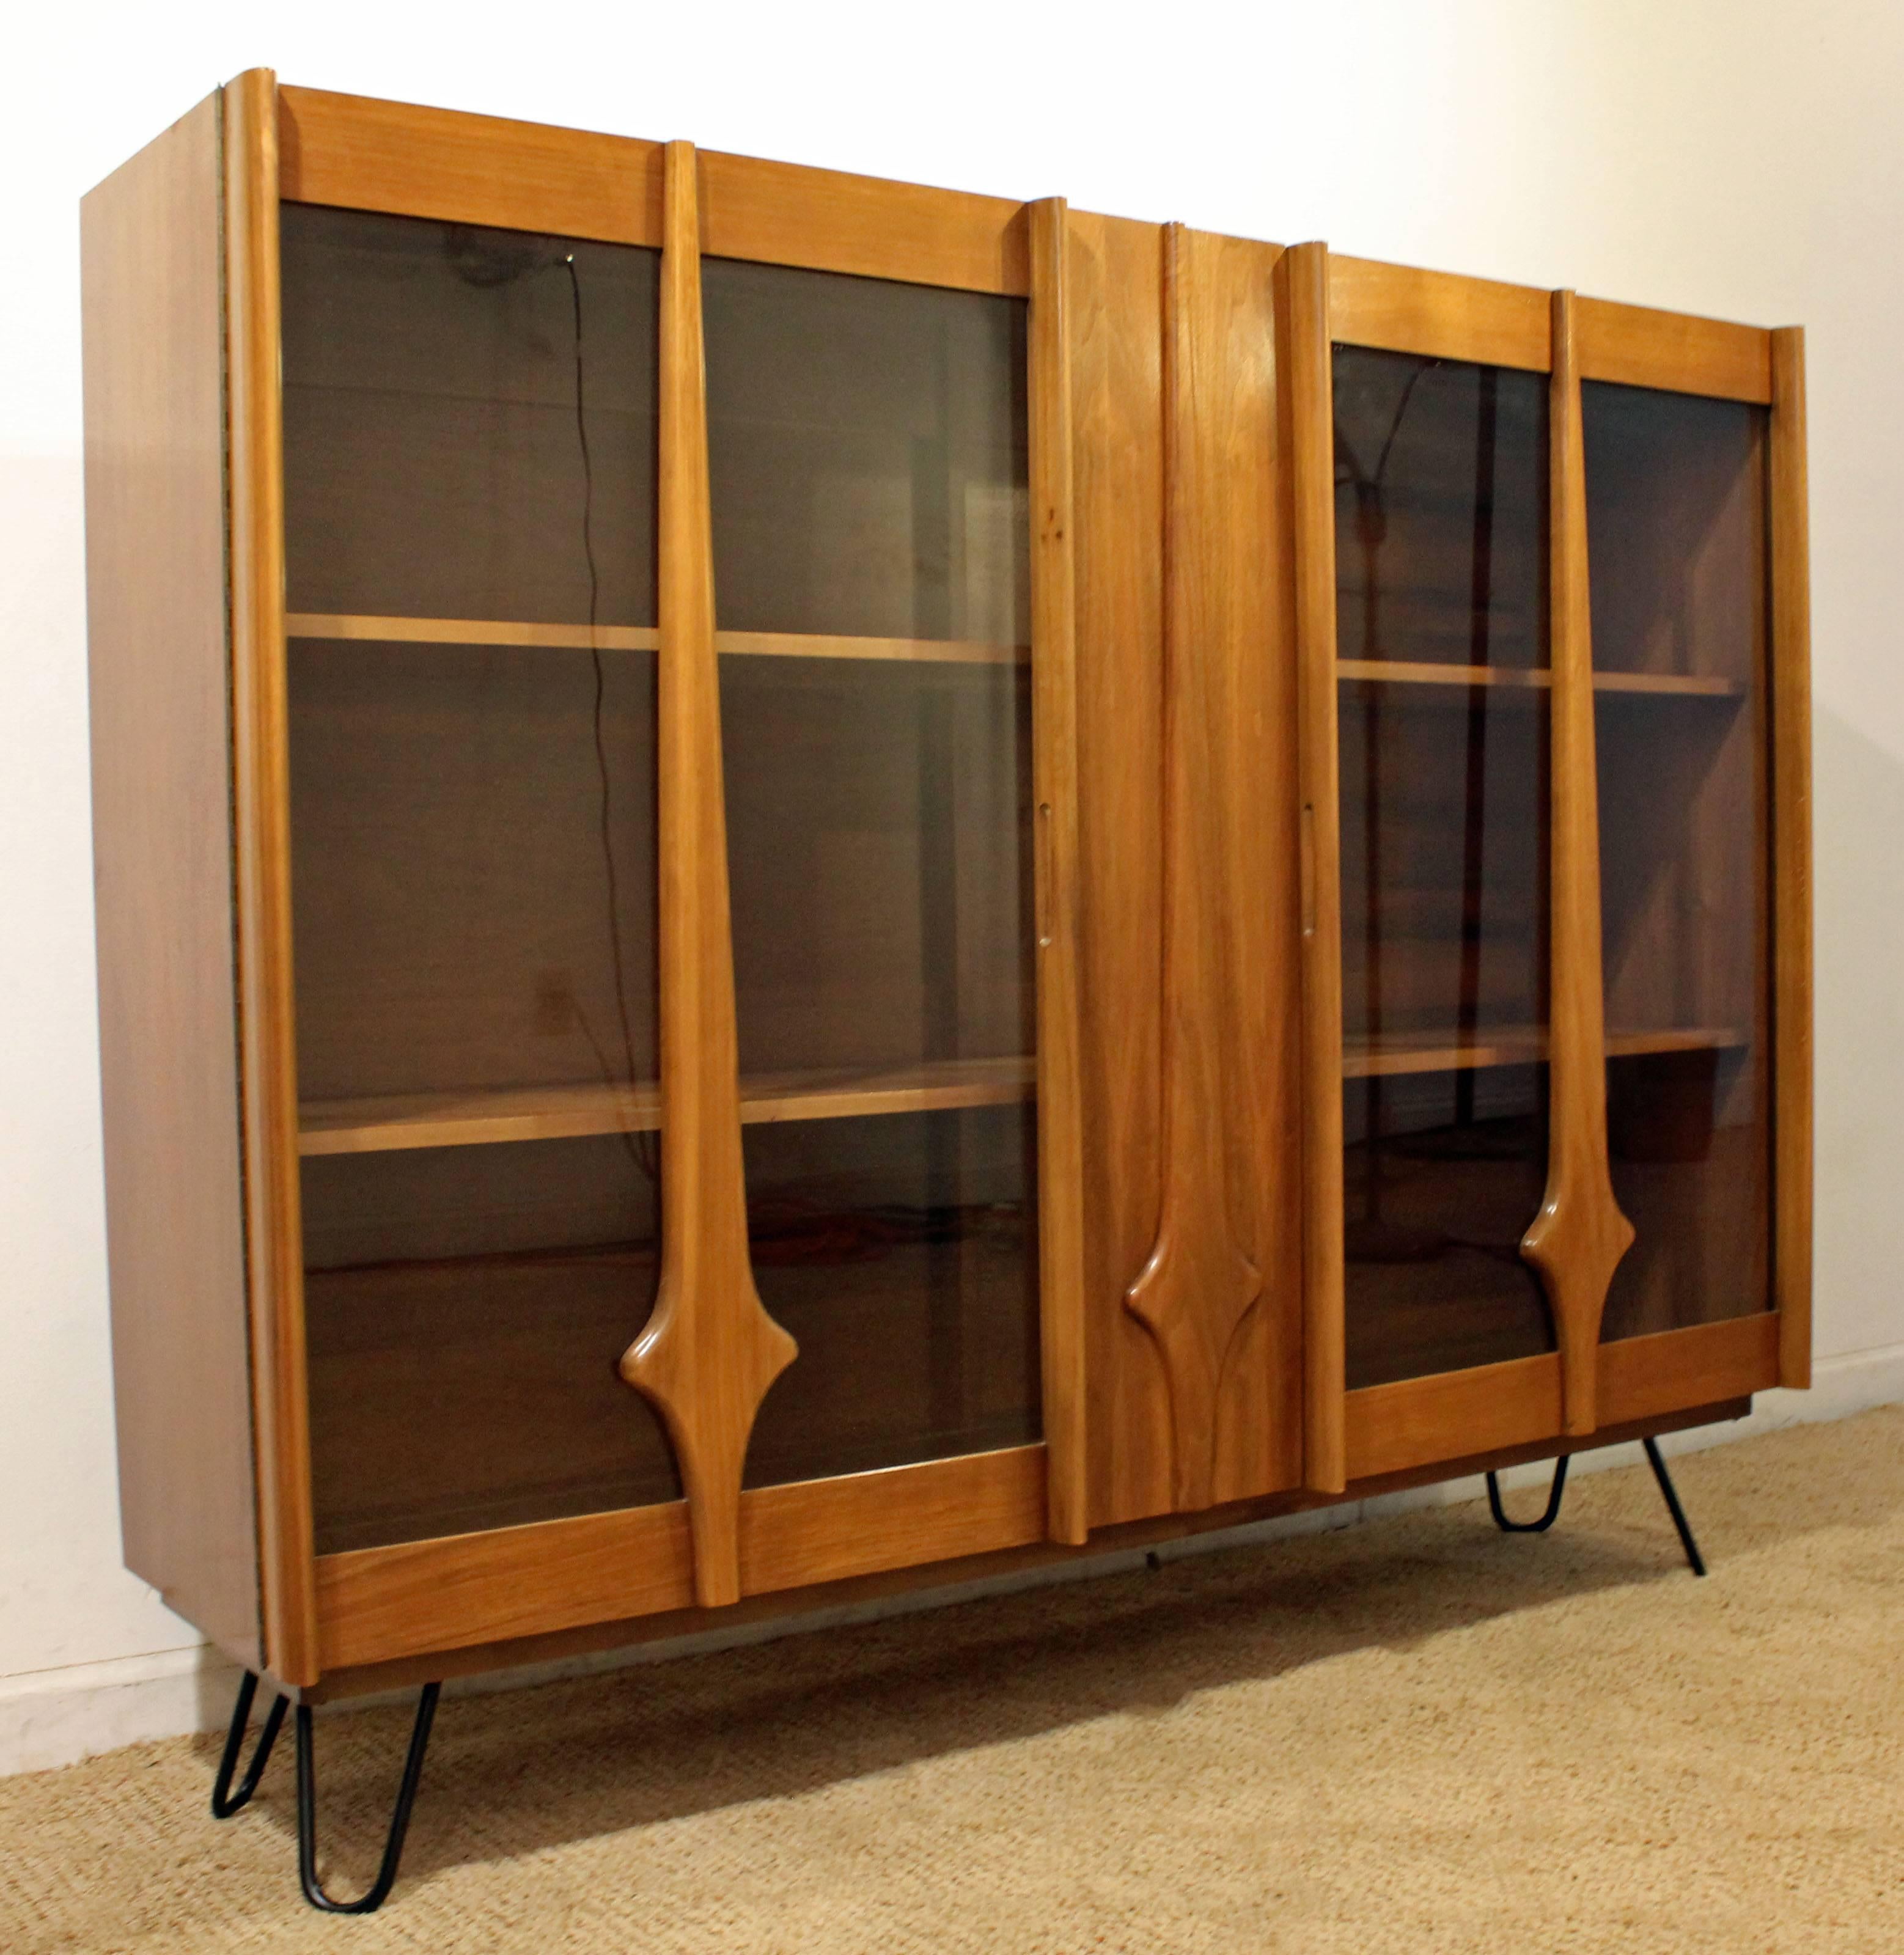 The piece is made of walnut, featuring two glass doors with shelving. This was a hutch top that has been attached to metal hairpin legs.

Dimensions:
60